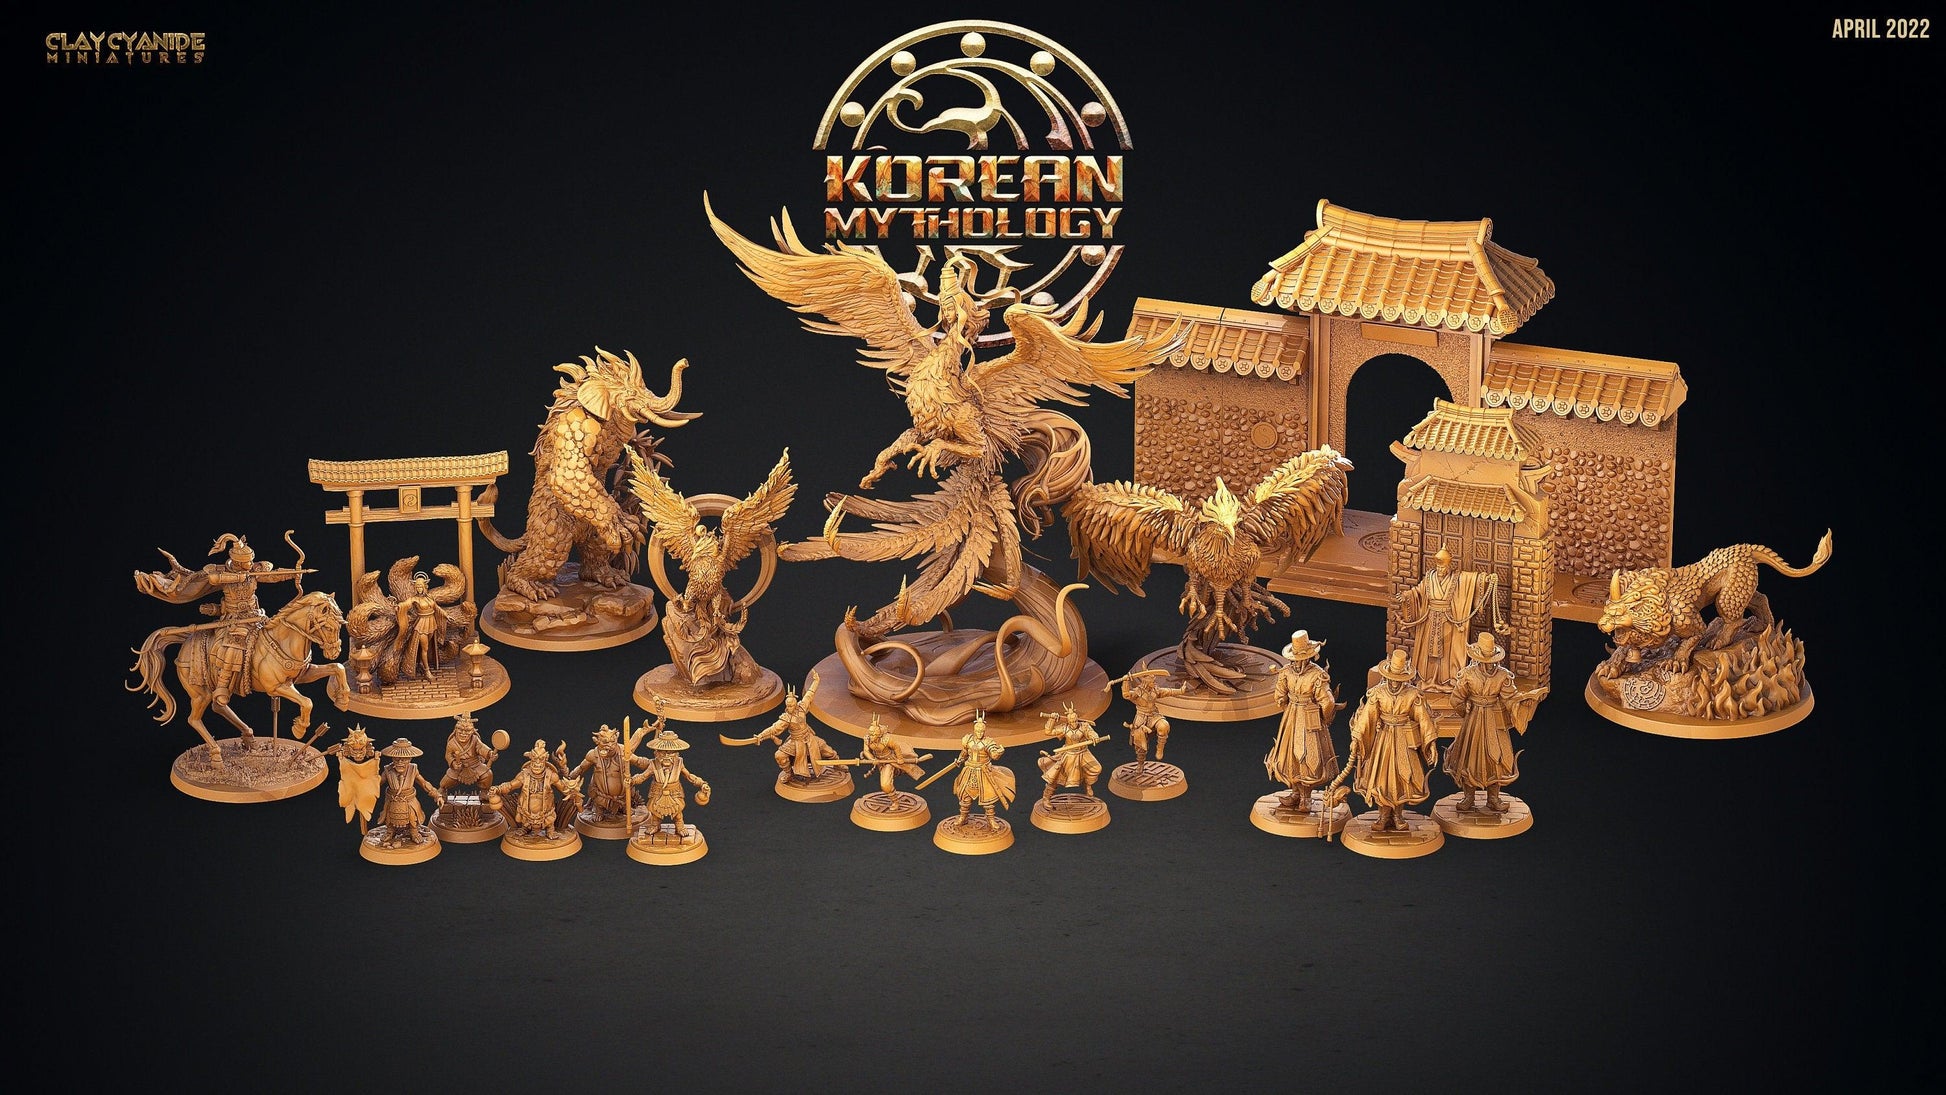 Gumiho miniature | Clay Cyanide | Korean Mythology | Tabletop Gaming | DnD Miniature | Dungeons and Dragons | Korean kumiho miniatures - Plague Miniatures shop for DnD Miniatures